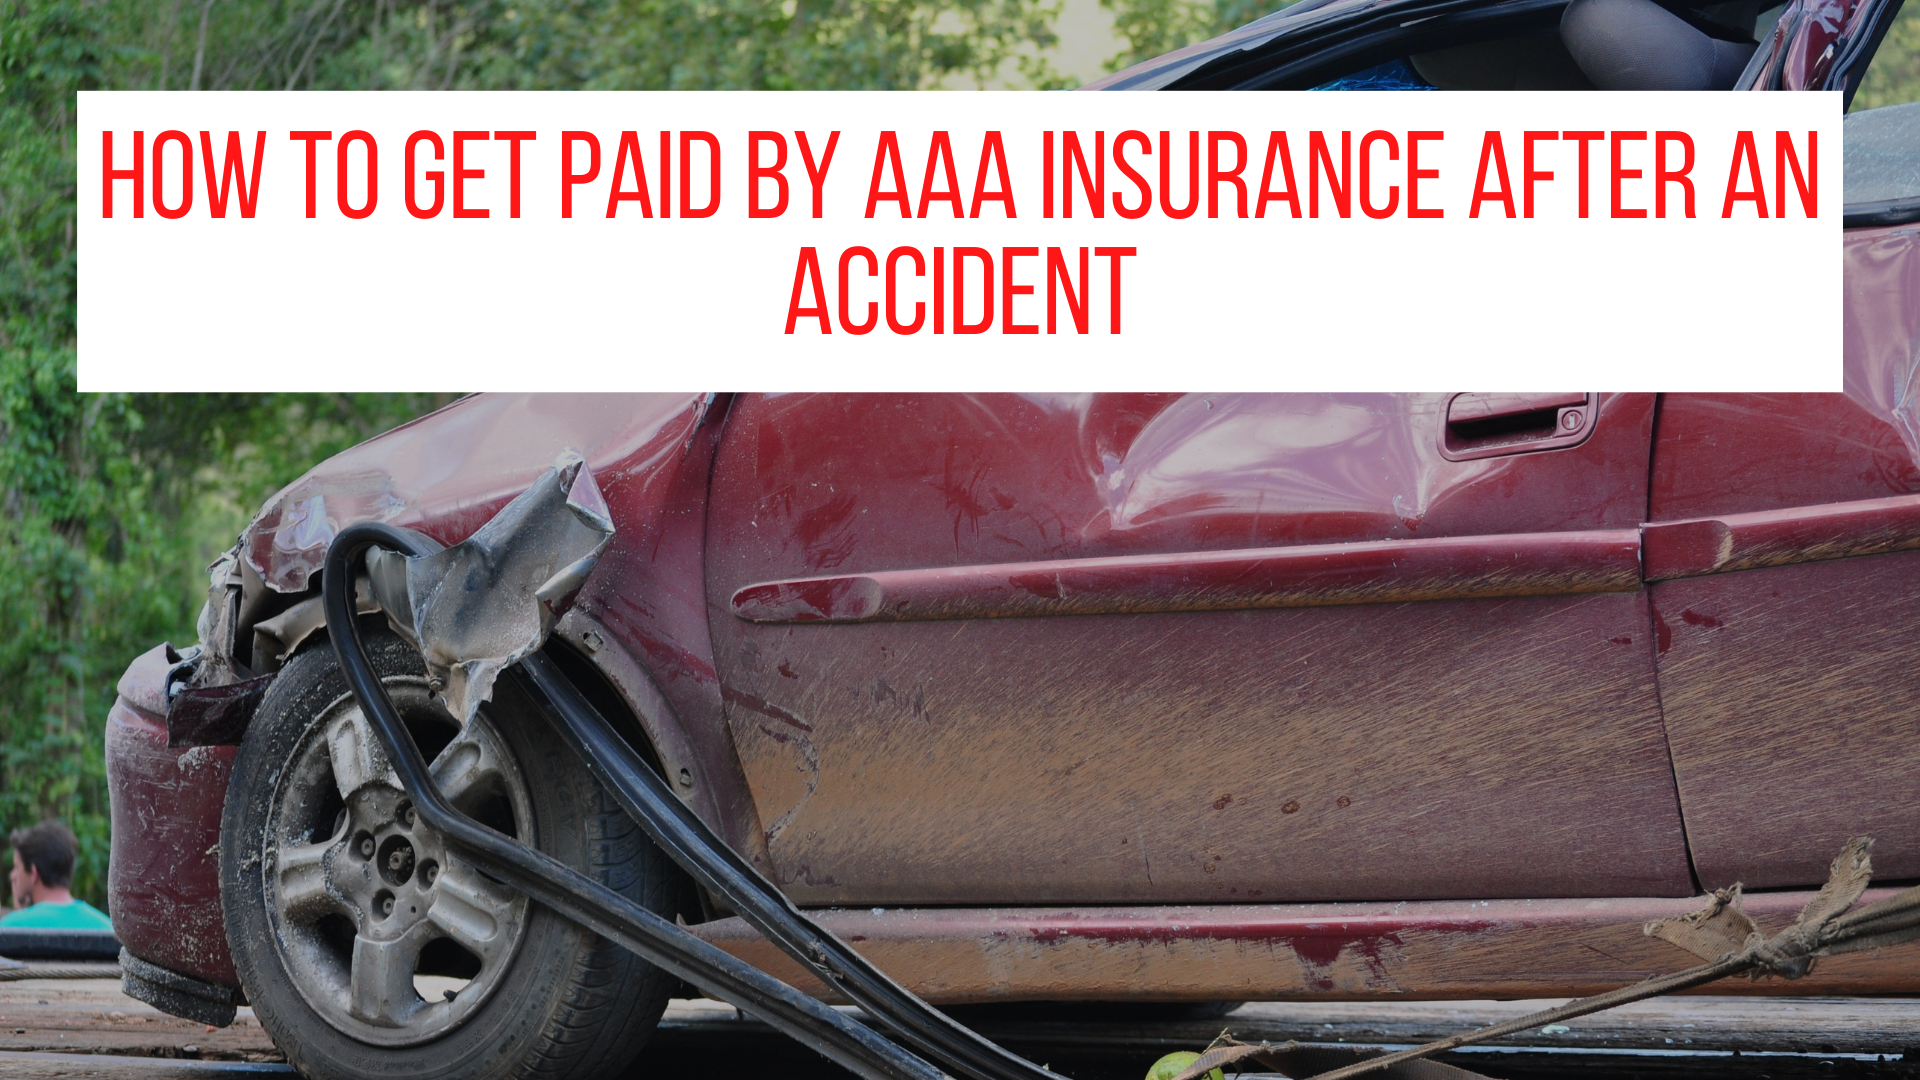 How to get paid by AAA insurance after an accident